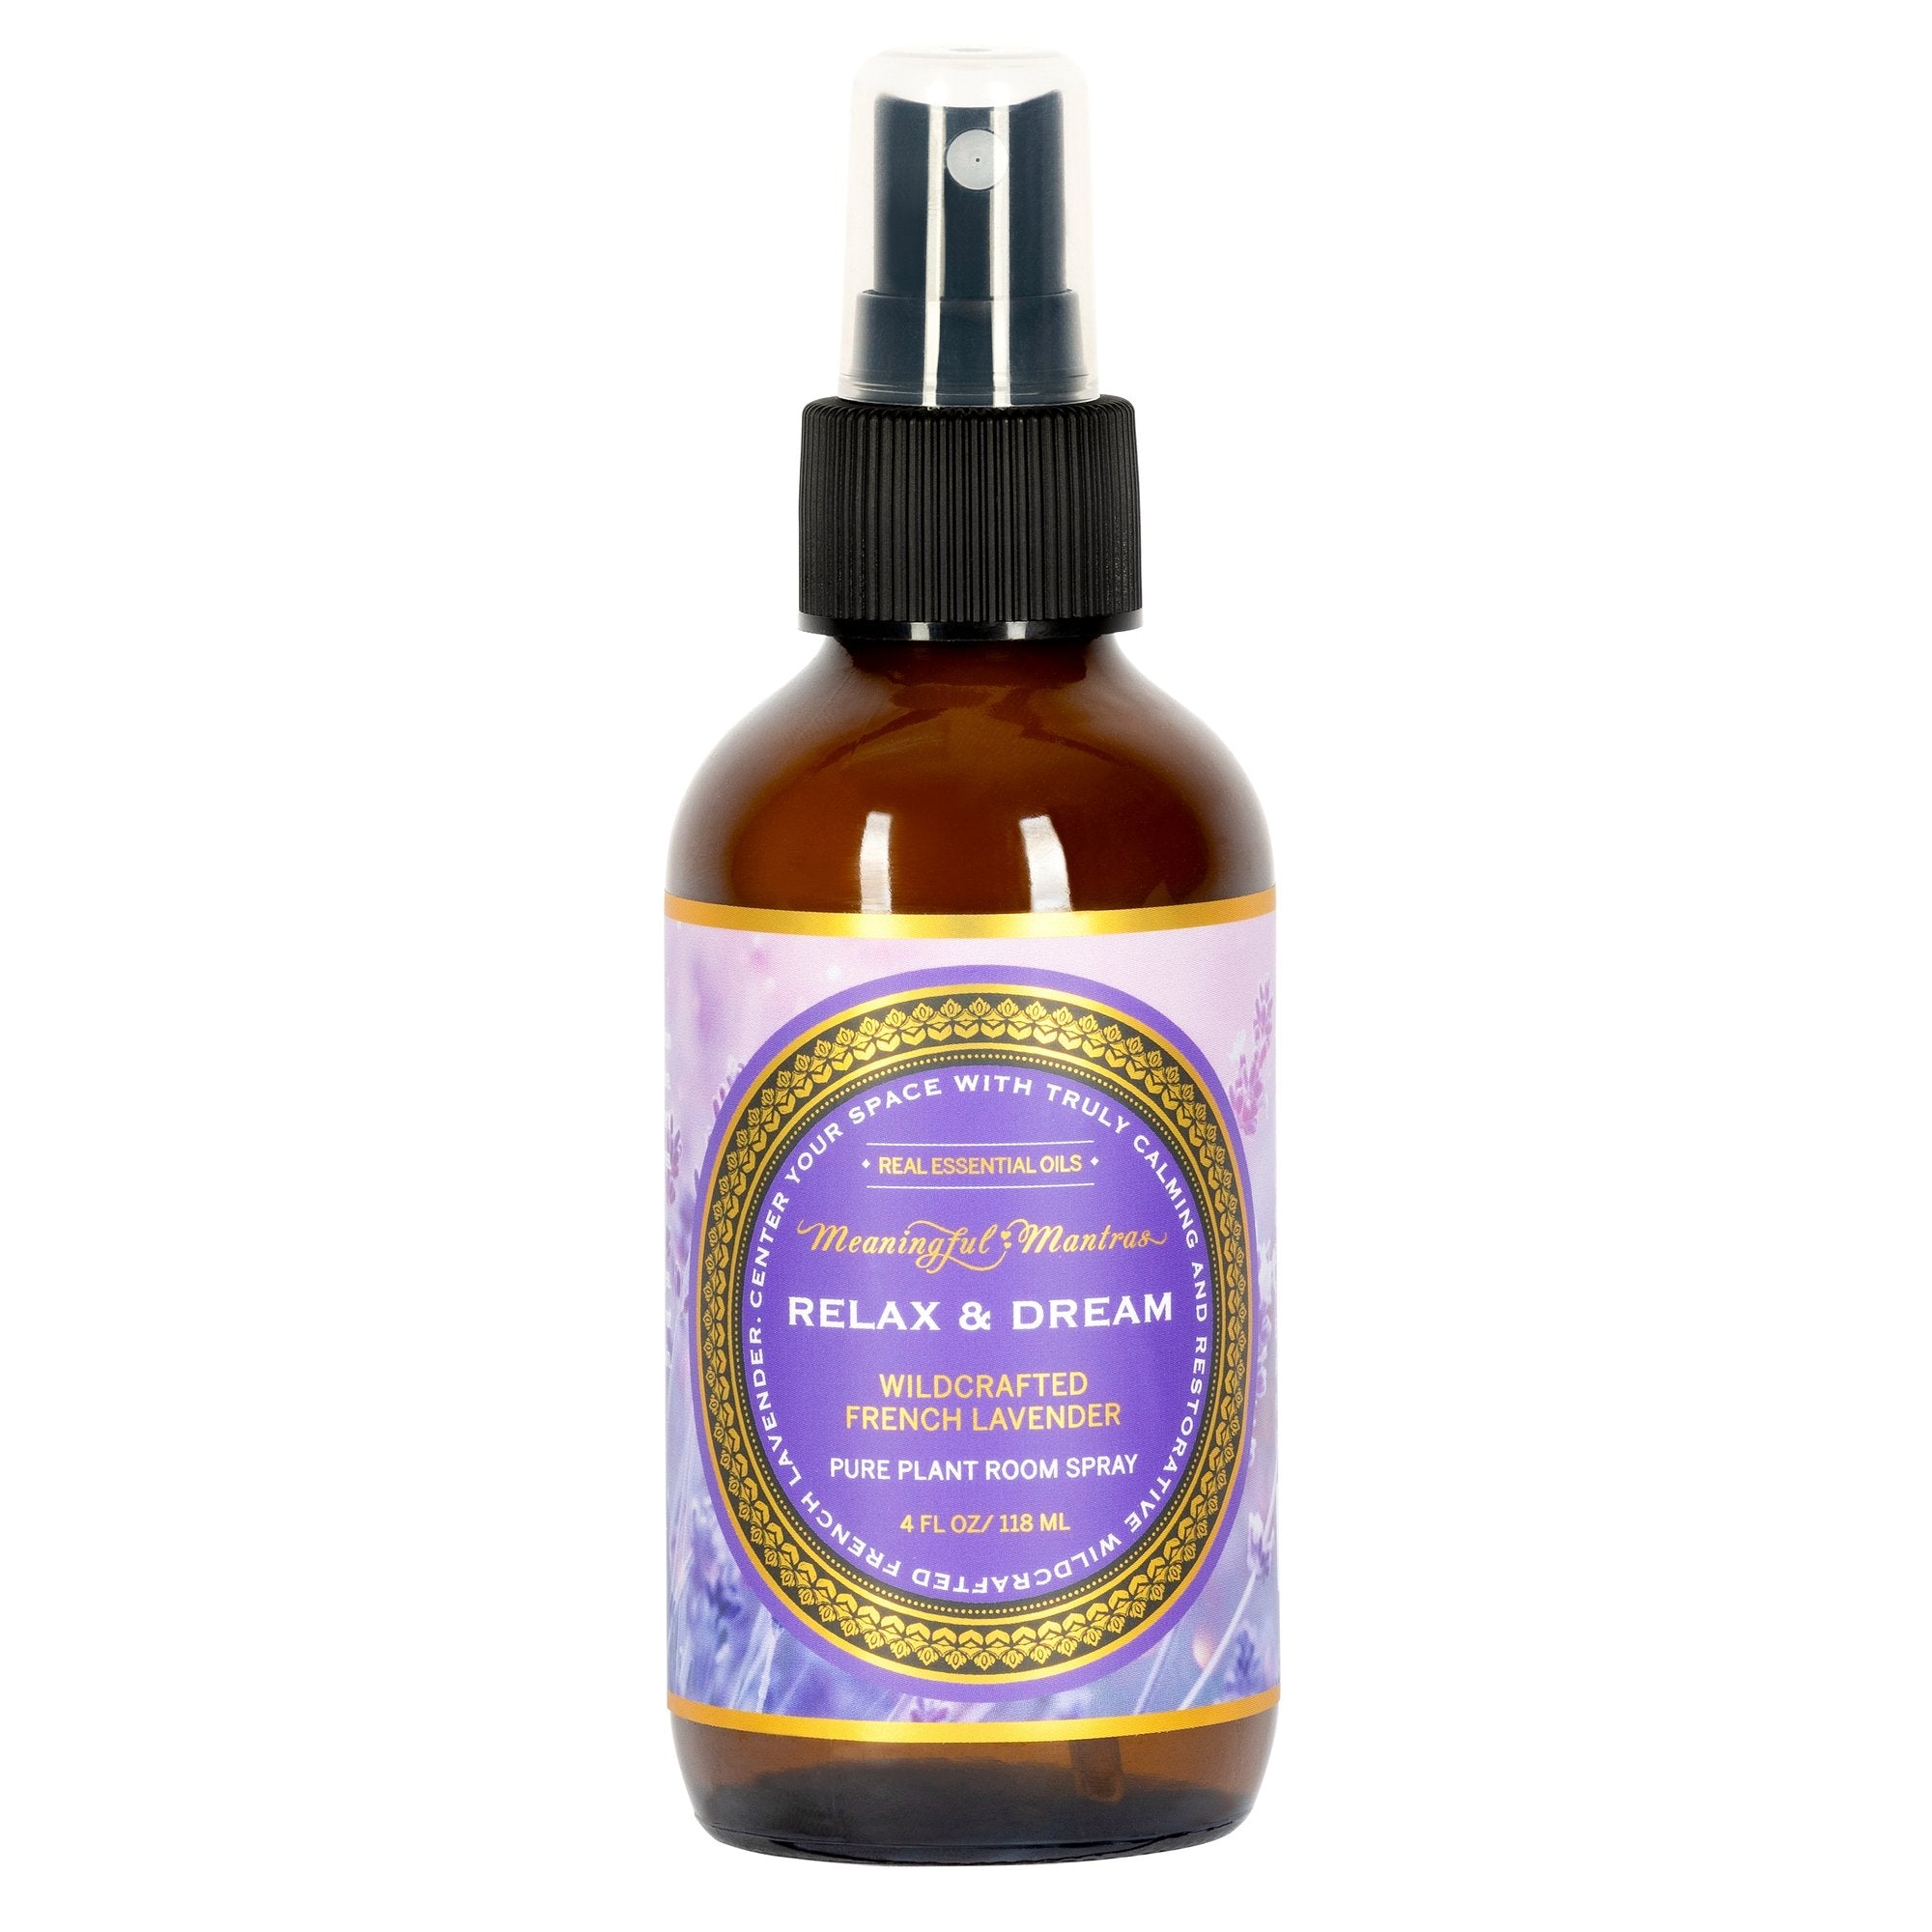 Relax & Dream Wildcrafted French Lavender Pure Plant Room Spray